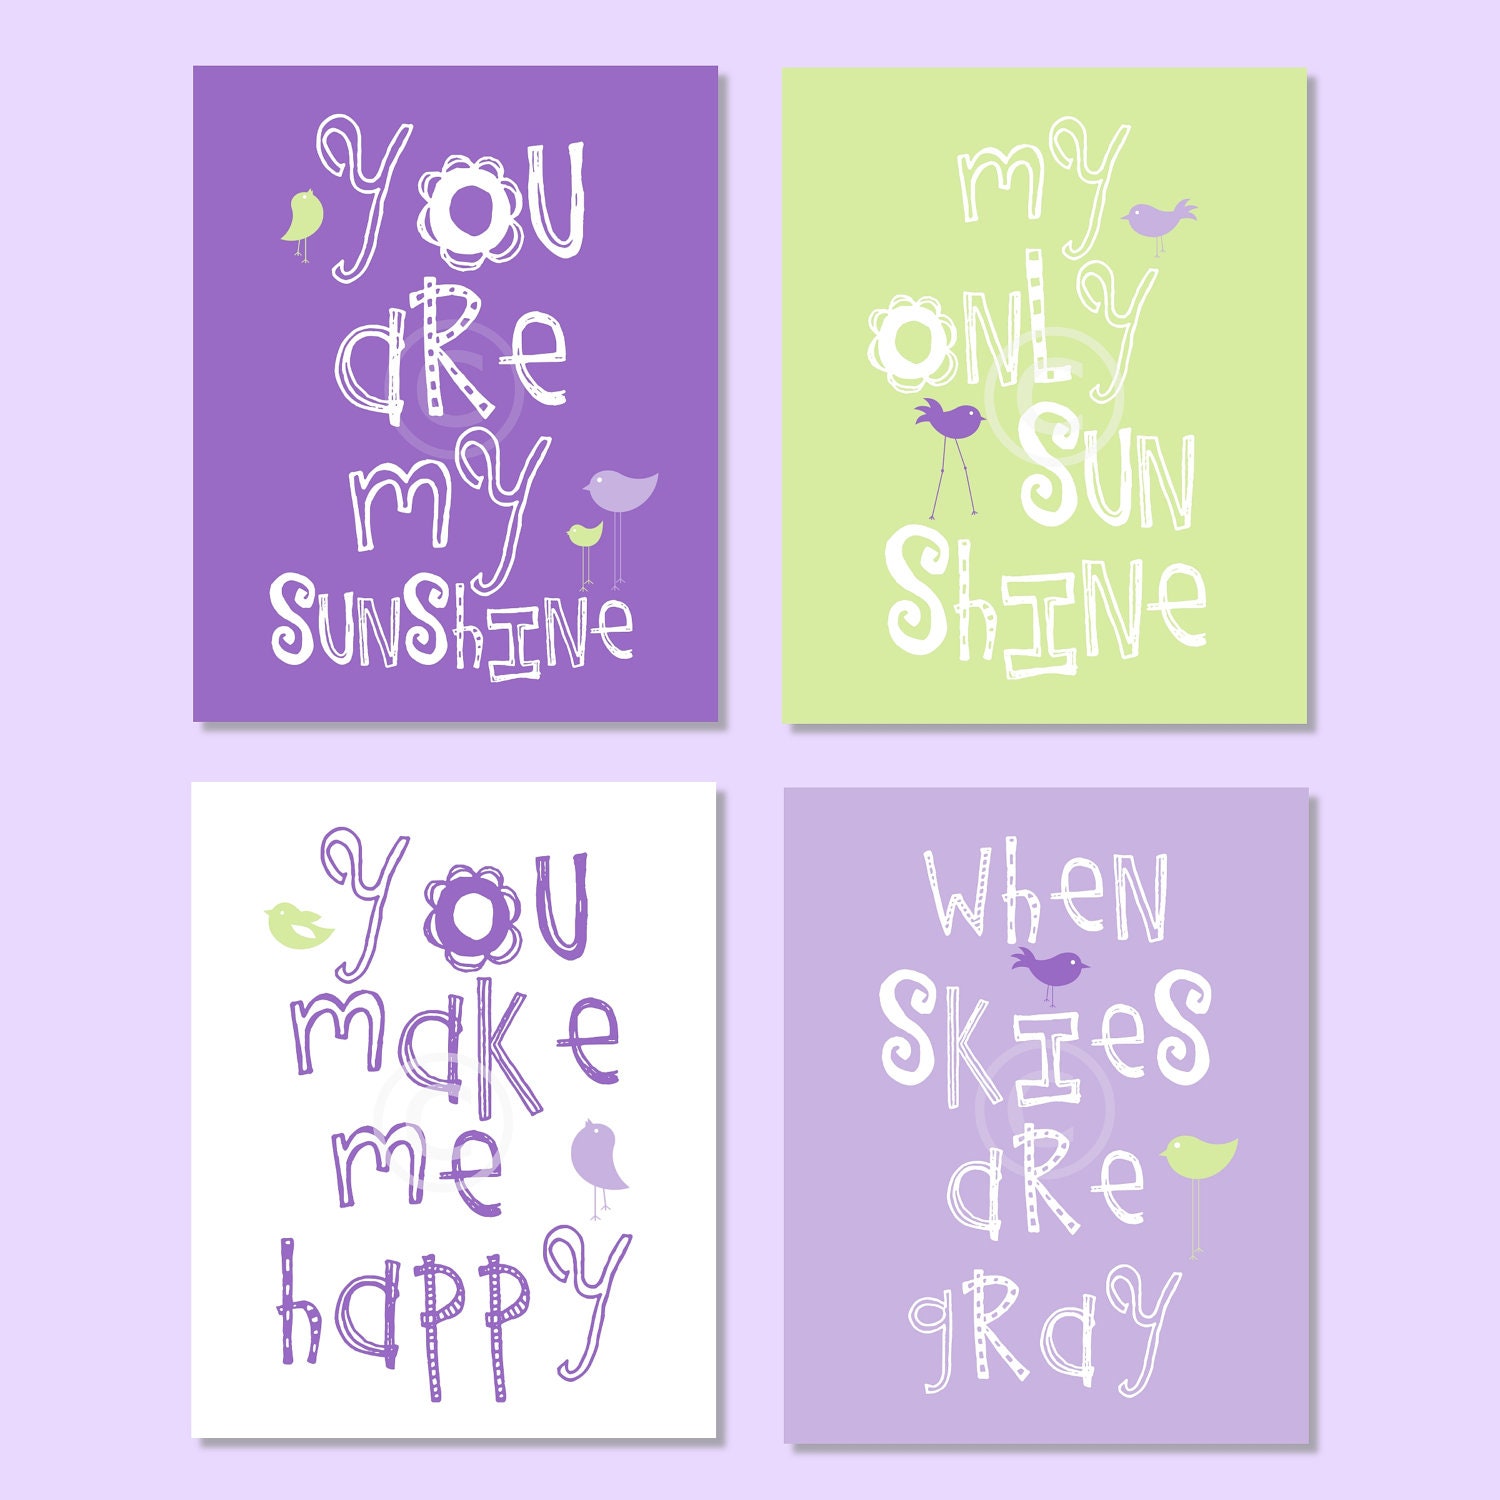 Popular items for kids wall art on Etsy